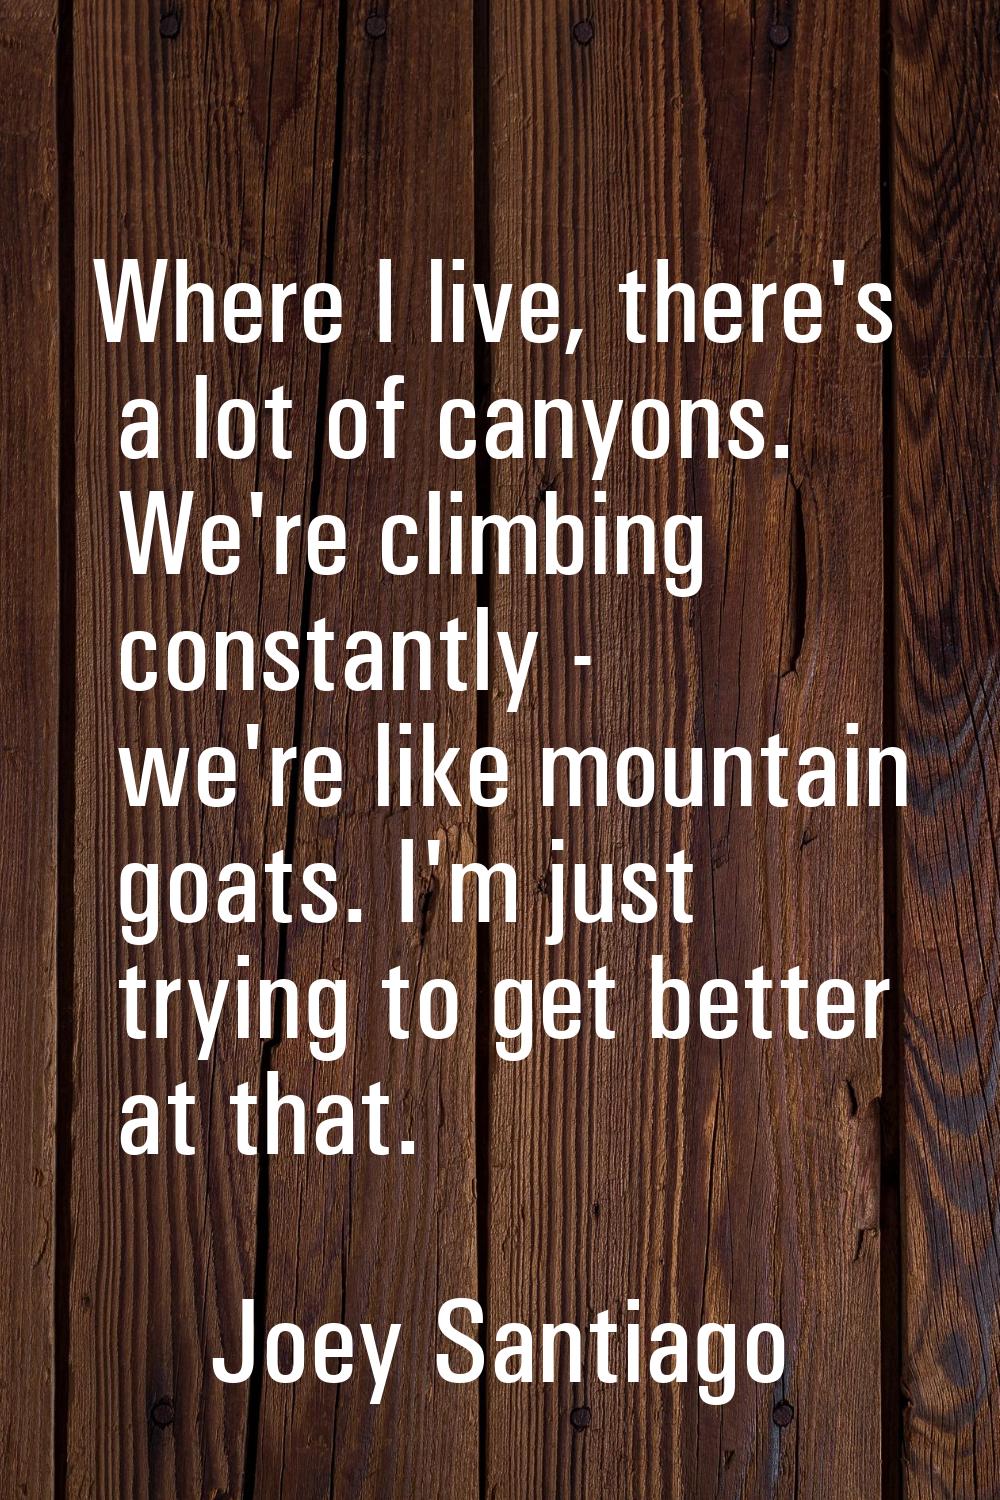 Where I live, there's a lot of canyons. We're climbing constantly - we're like mountain goats. I'm 